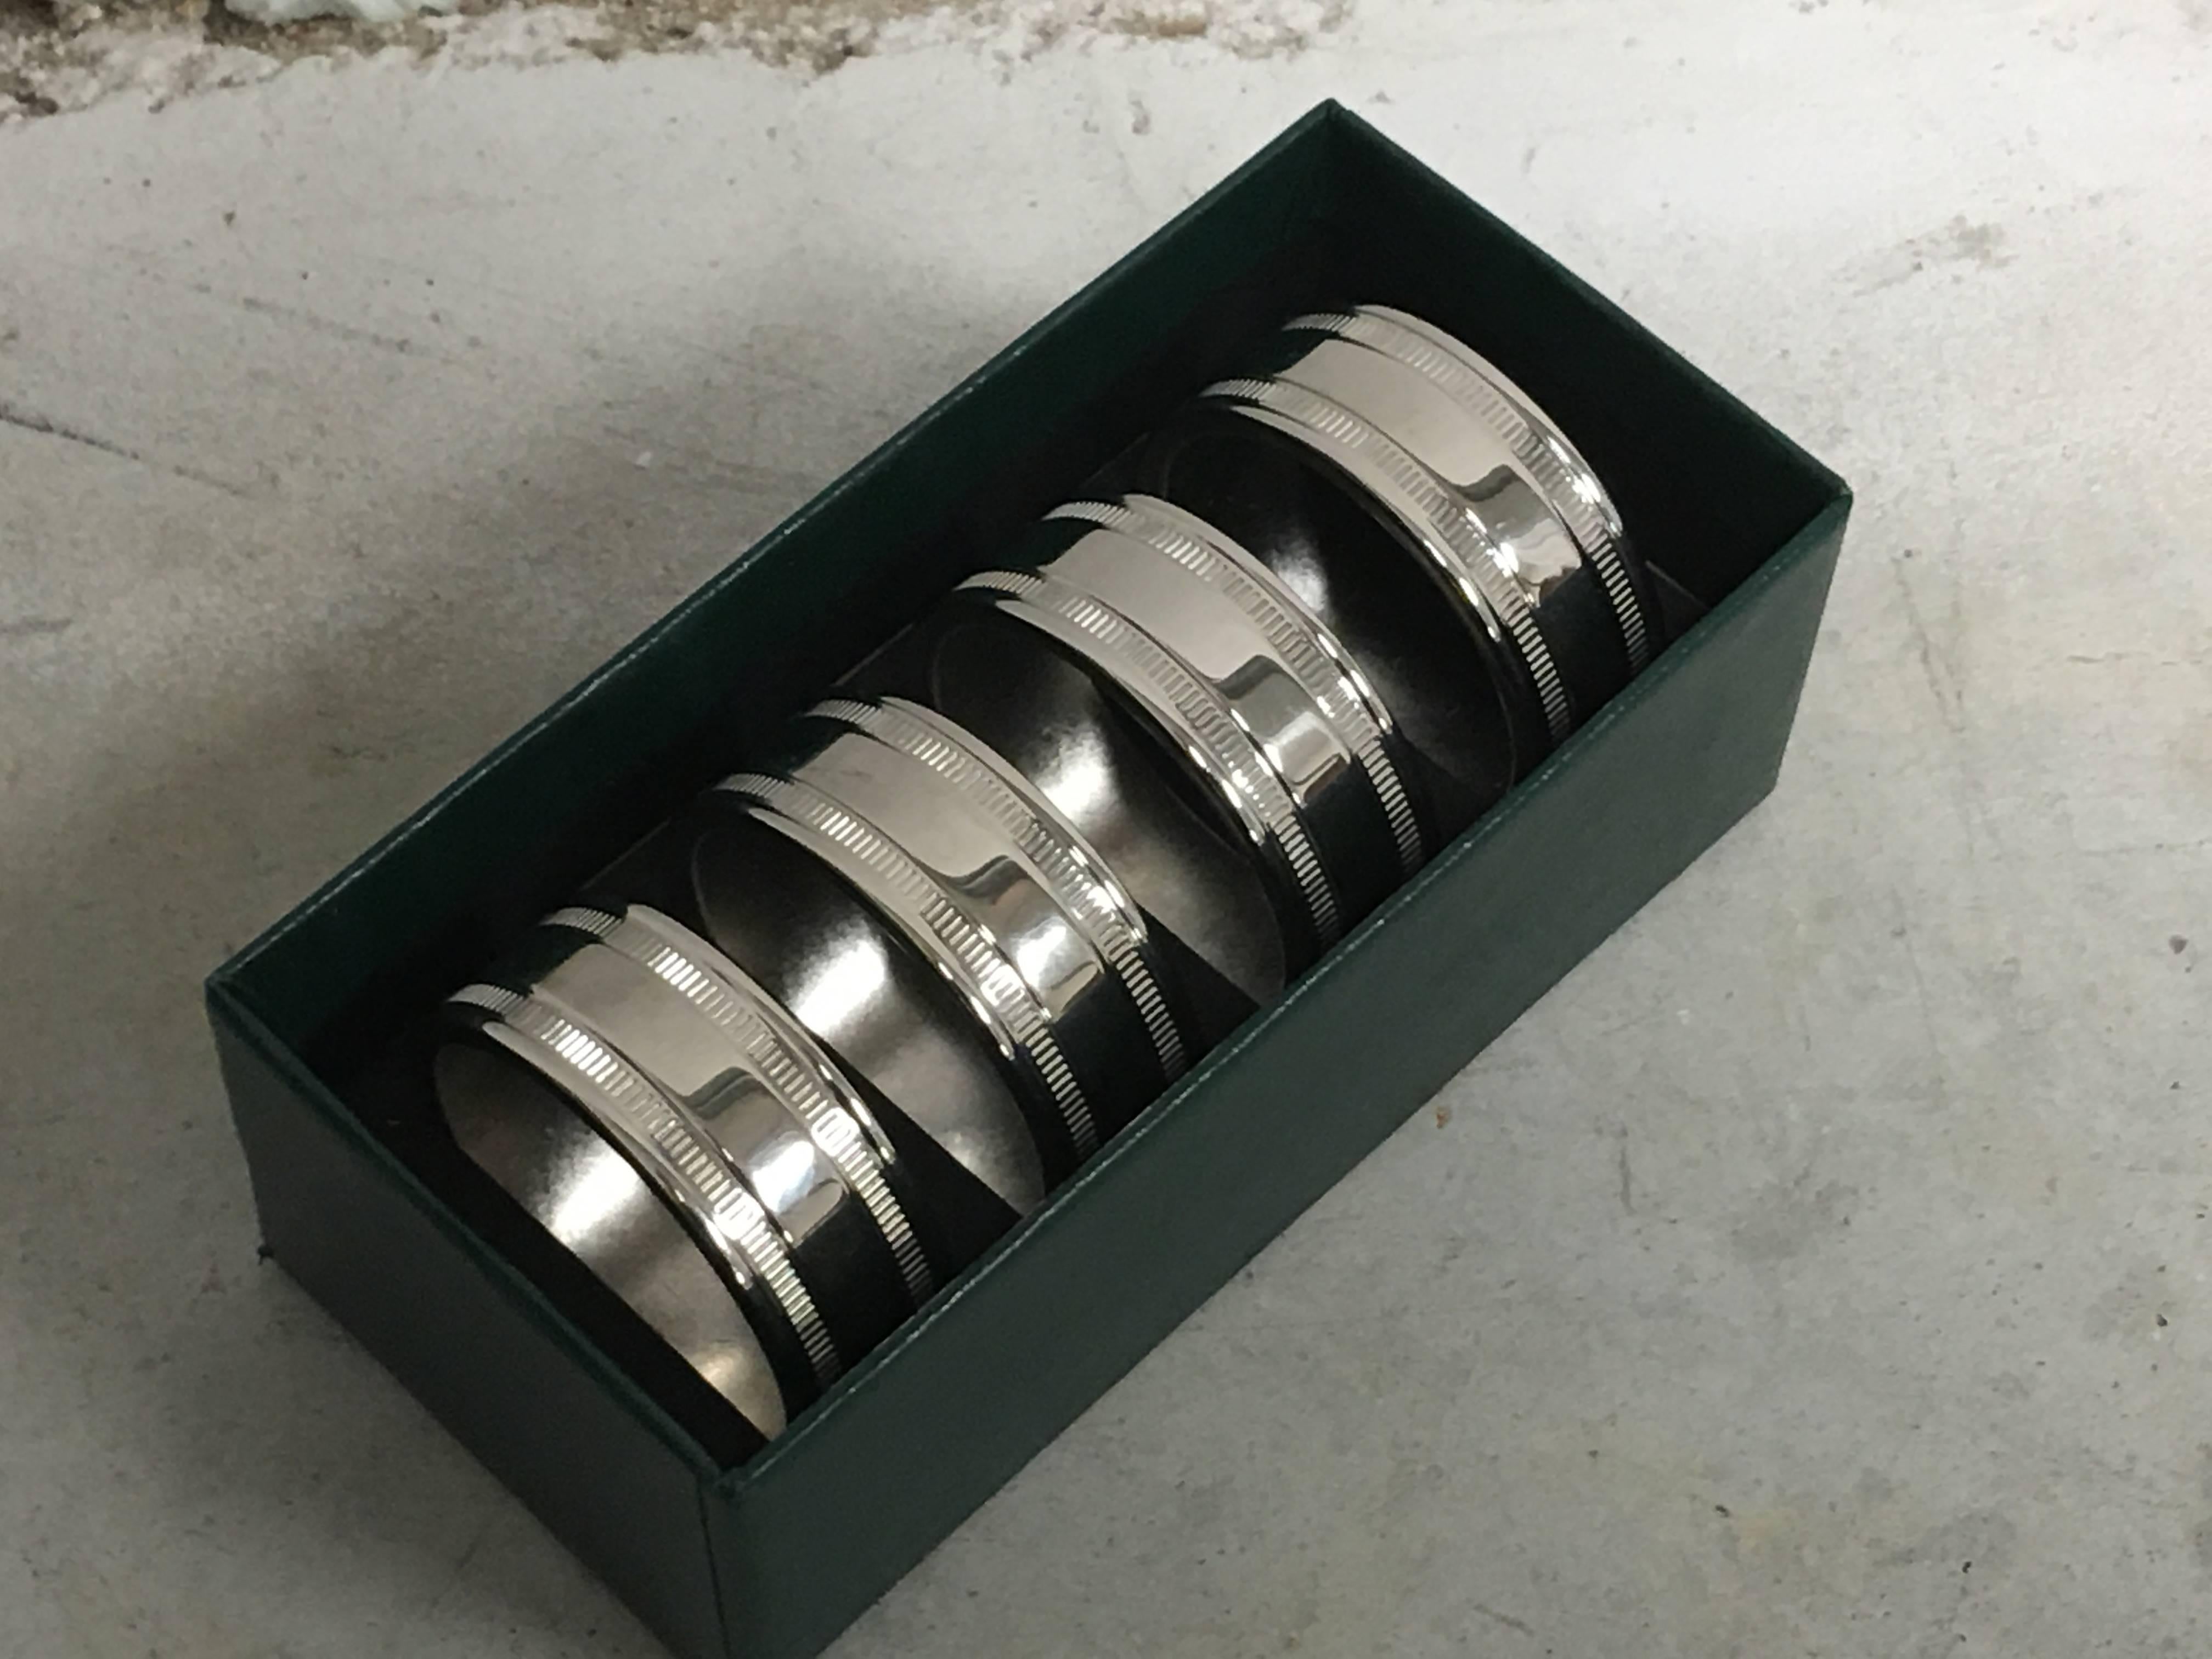 Offered is a truly immaculate, set of four 1980s Virginia Metalcrafters silver plated brass napkin rings. Includes original box, never used. Substantial weight.

“Since 1890, the Virginia Metalcrafters hallmark has become synonymous with fine